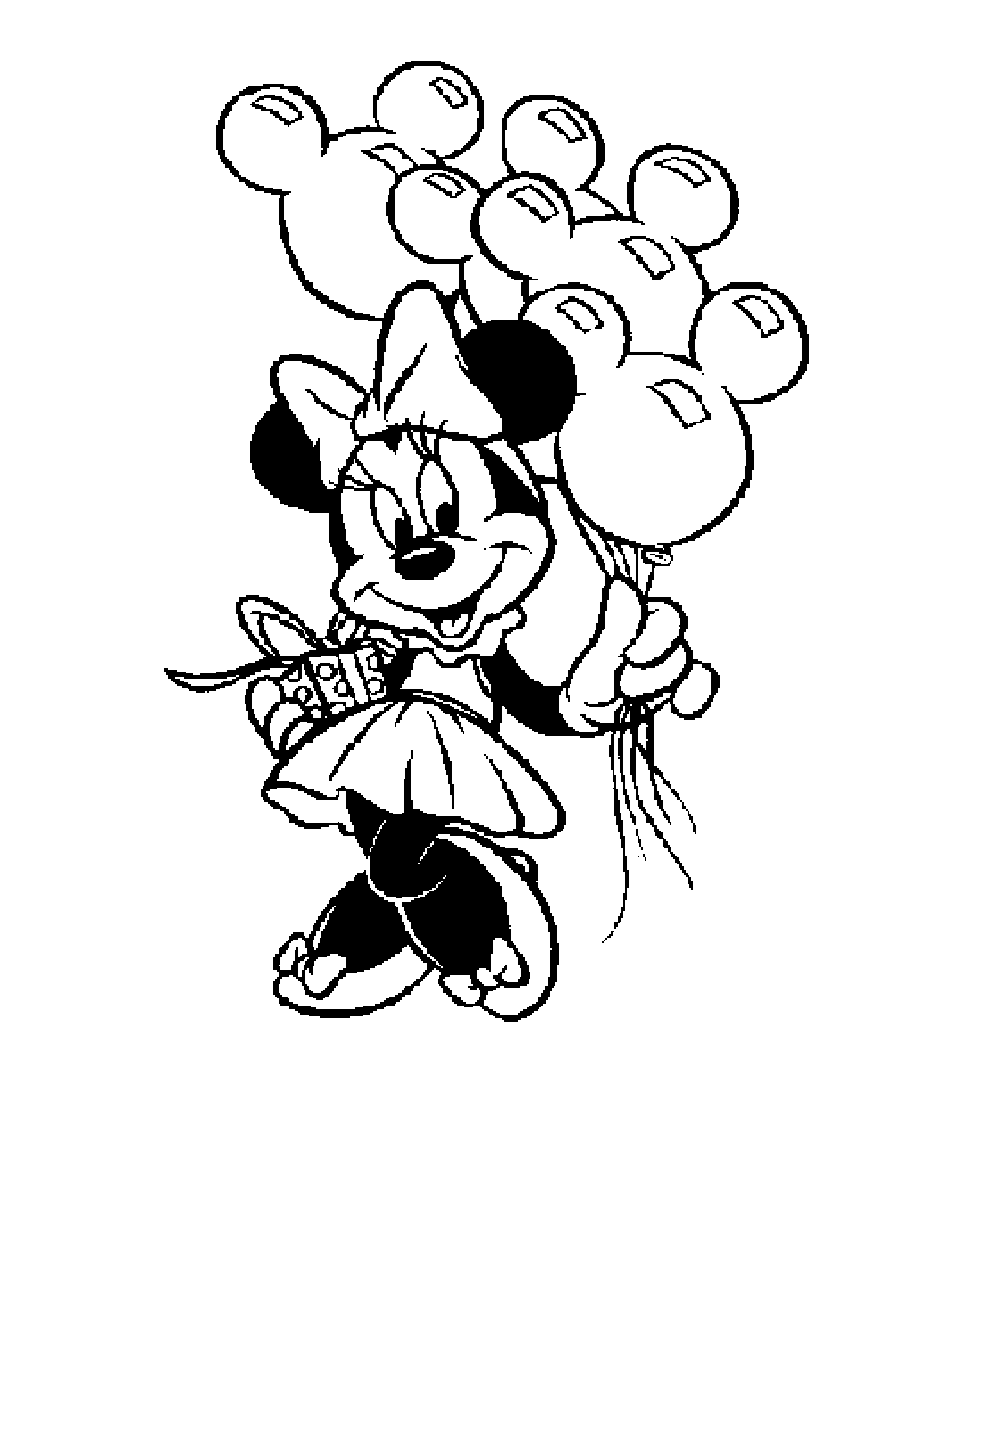 Print & Download - Free Minnie Mouse Coloring Pages